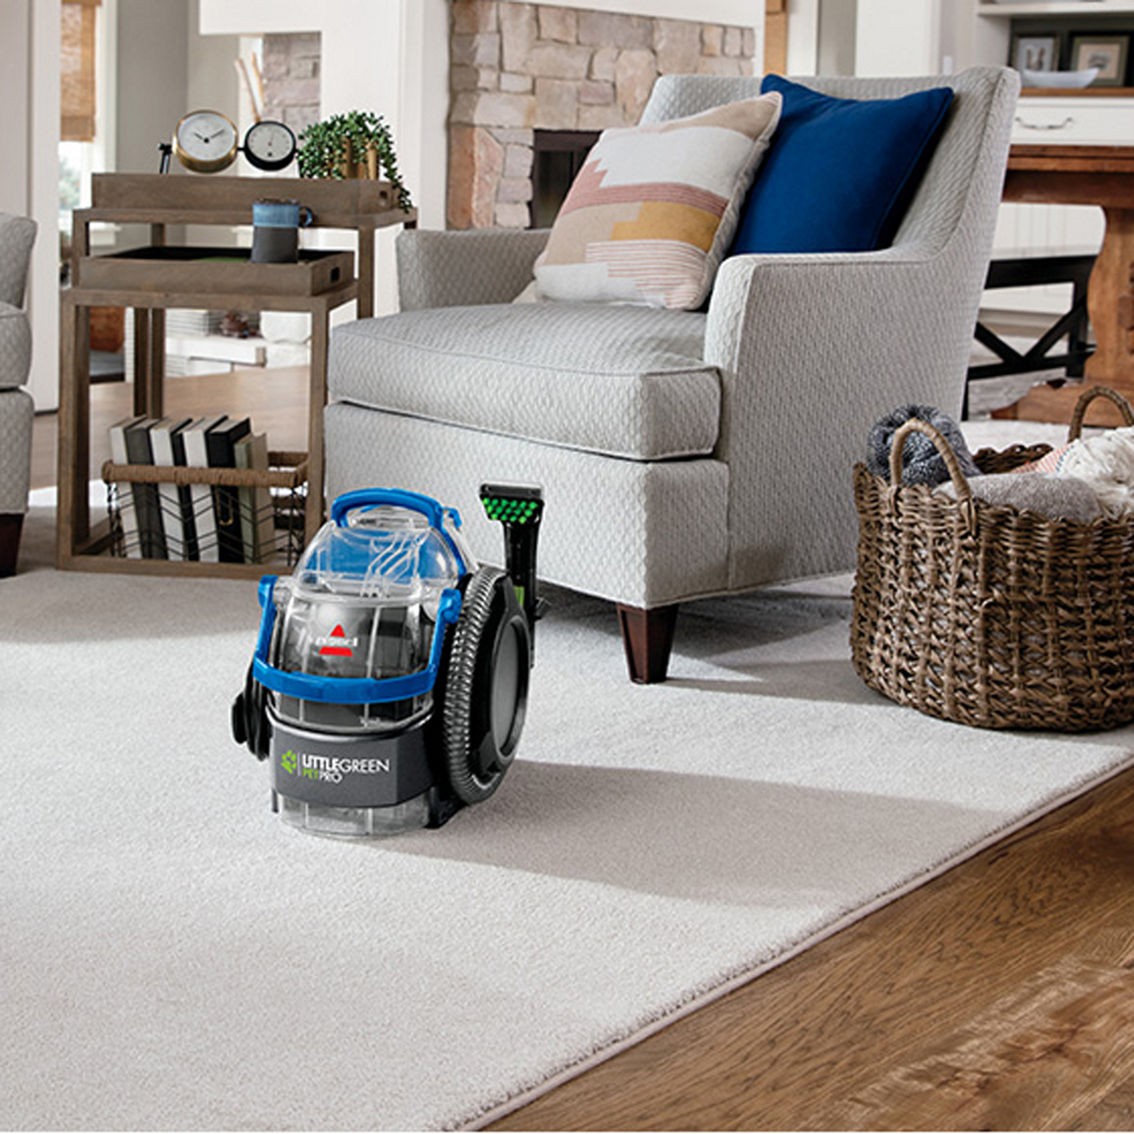 Bissell Little Green Pro Pet Portable Carpet Cleaner - Image 2 of 7